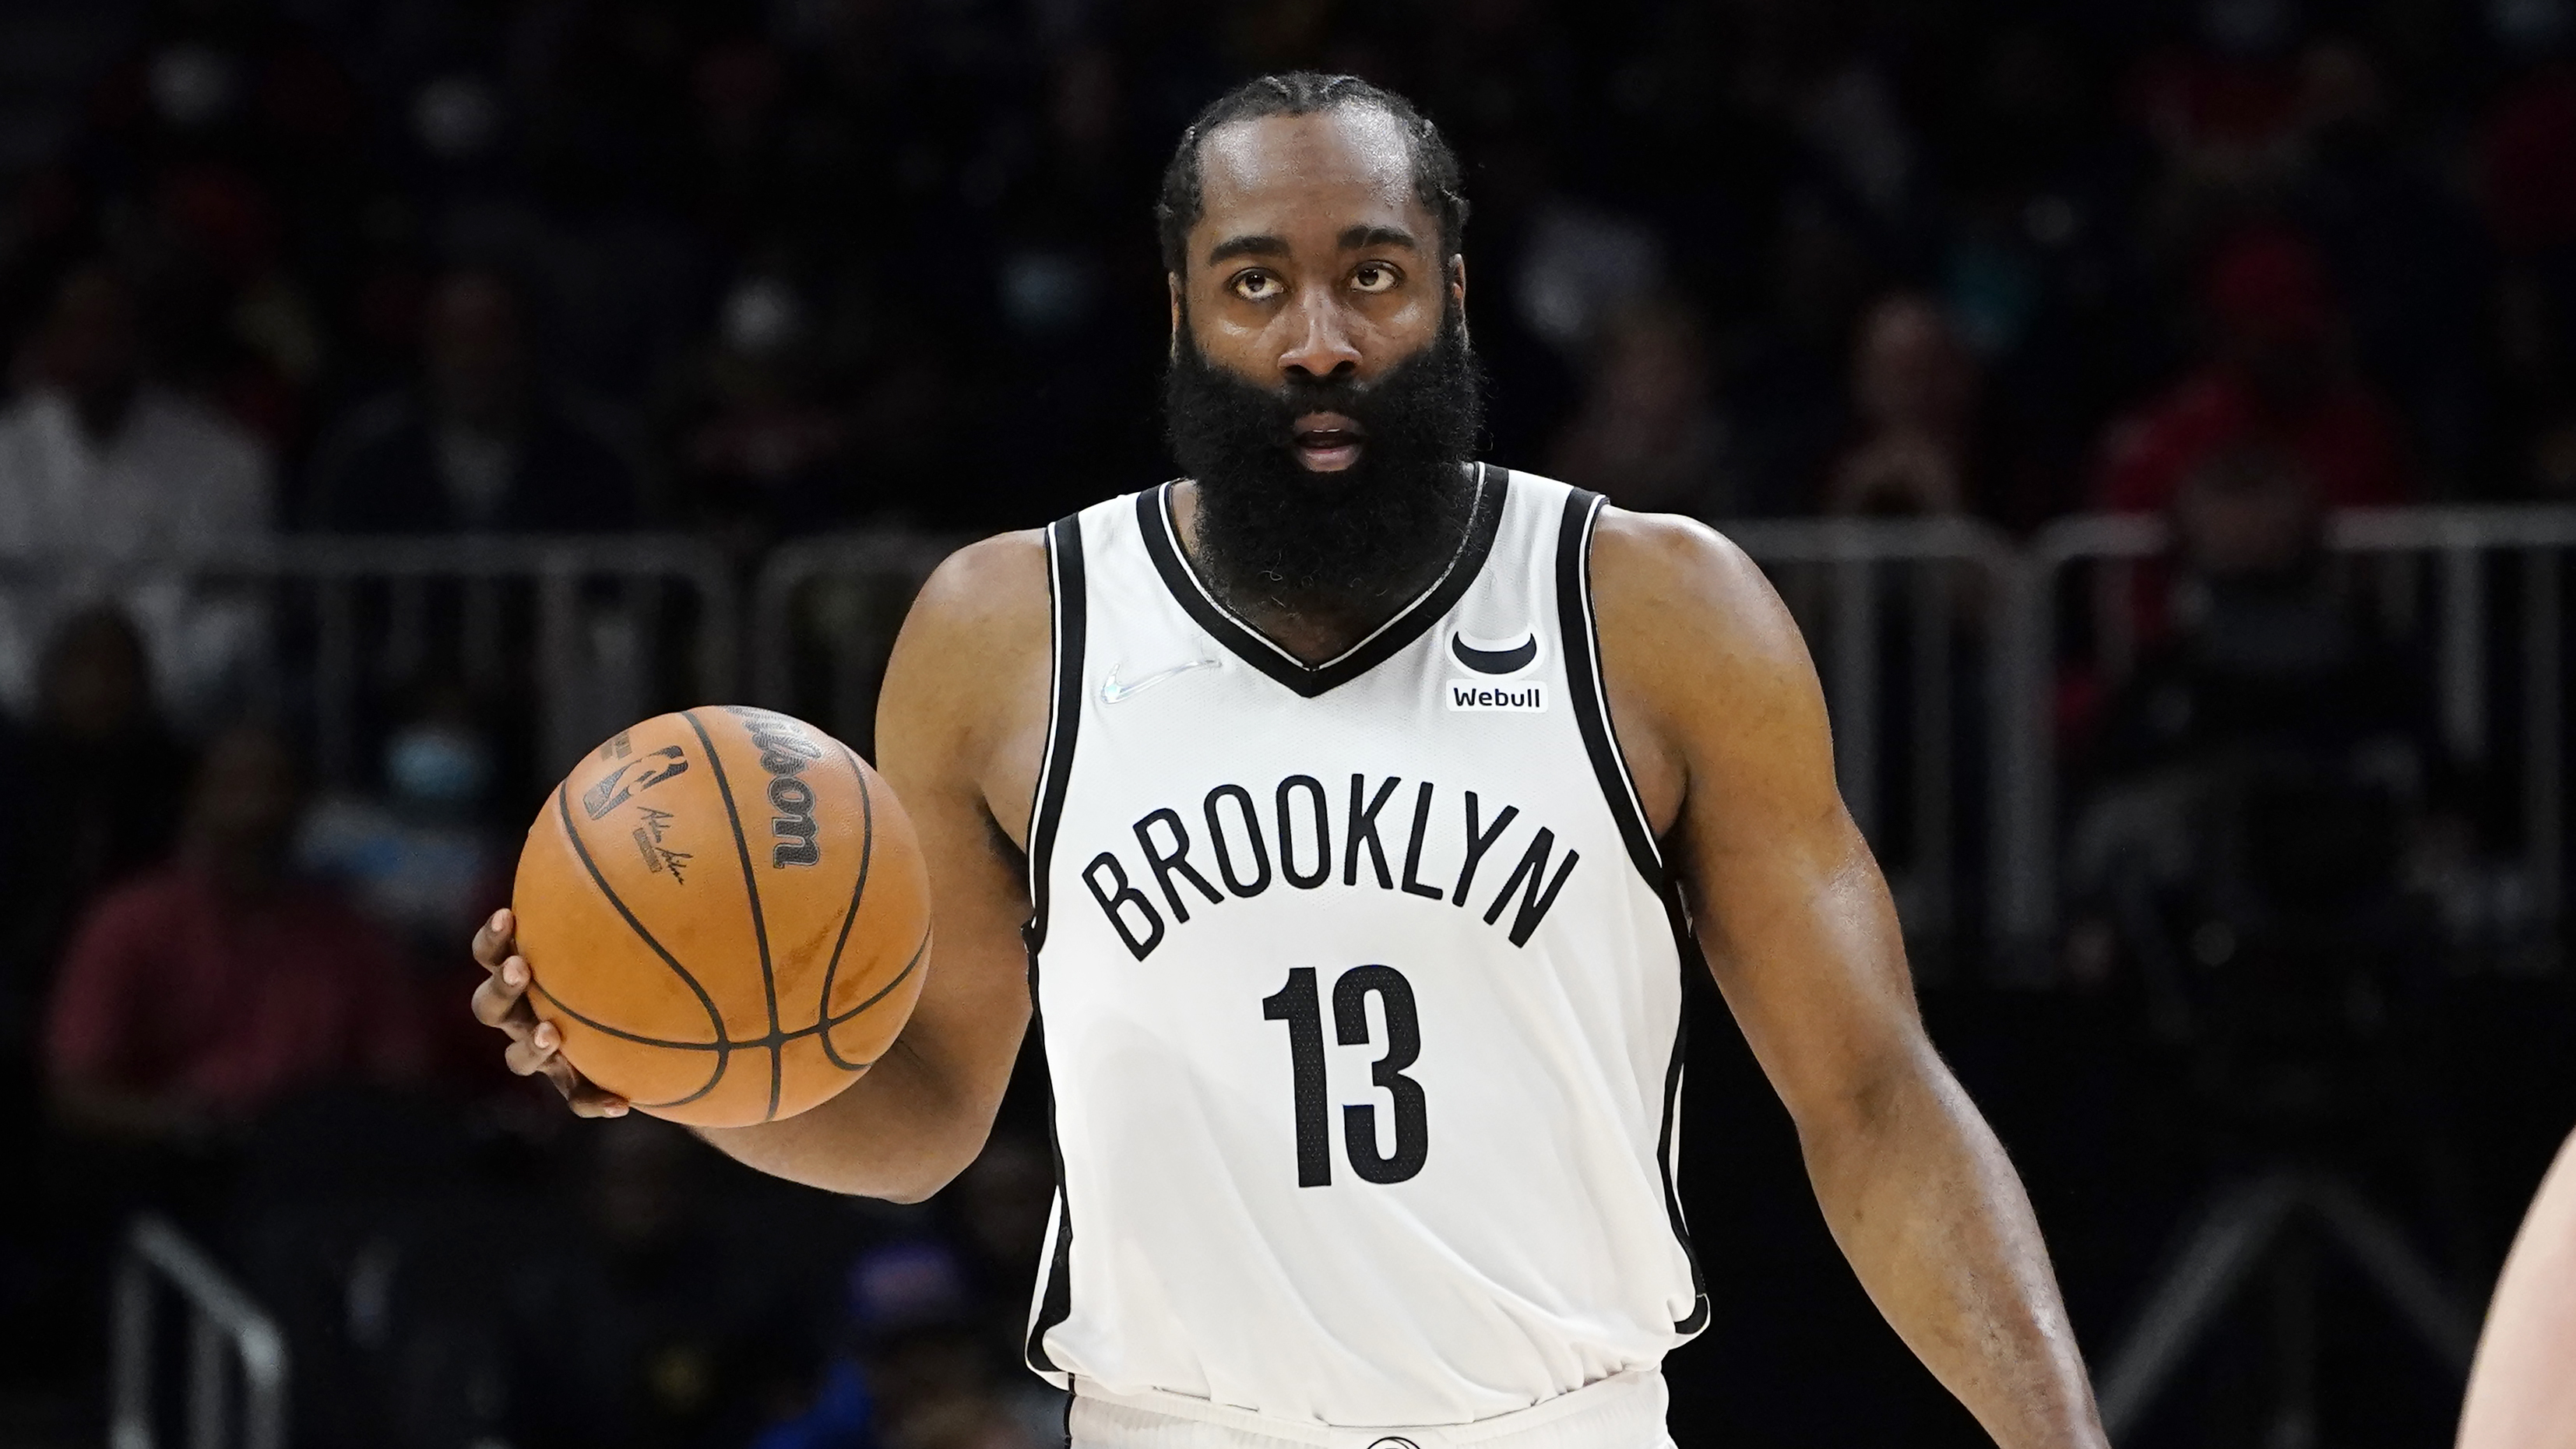 James Harden Ruled Out for Nets vs. Trail Blazers with Knee Injury